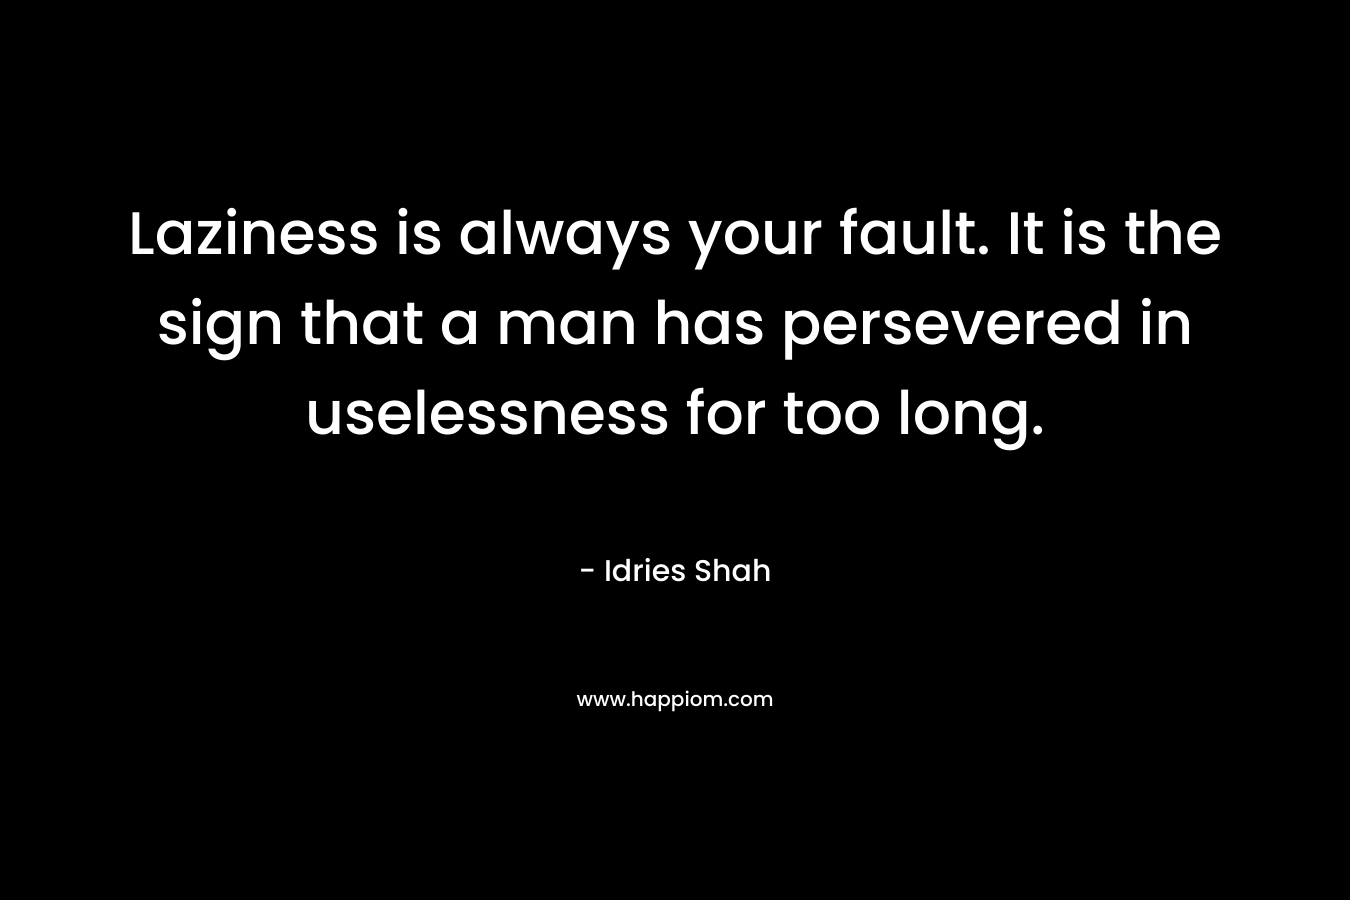 Laziness is always your fault. It is the sign that a man has persevered in uselessness for too long.